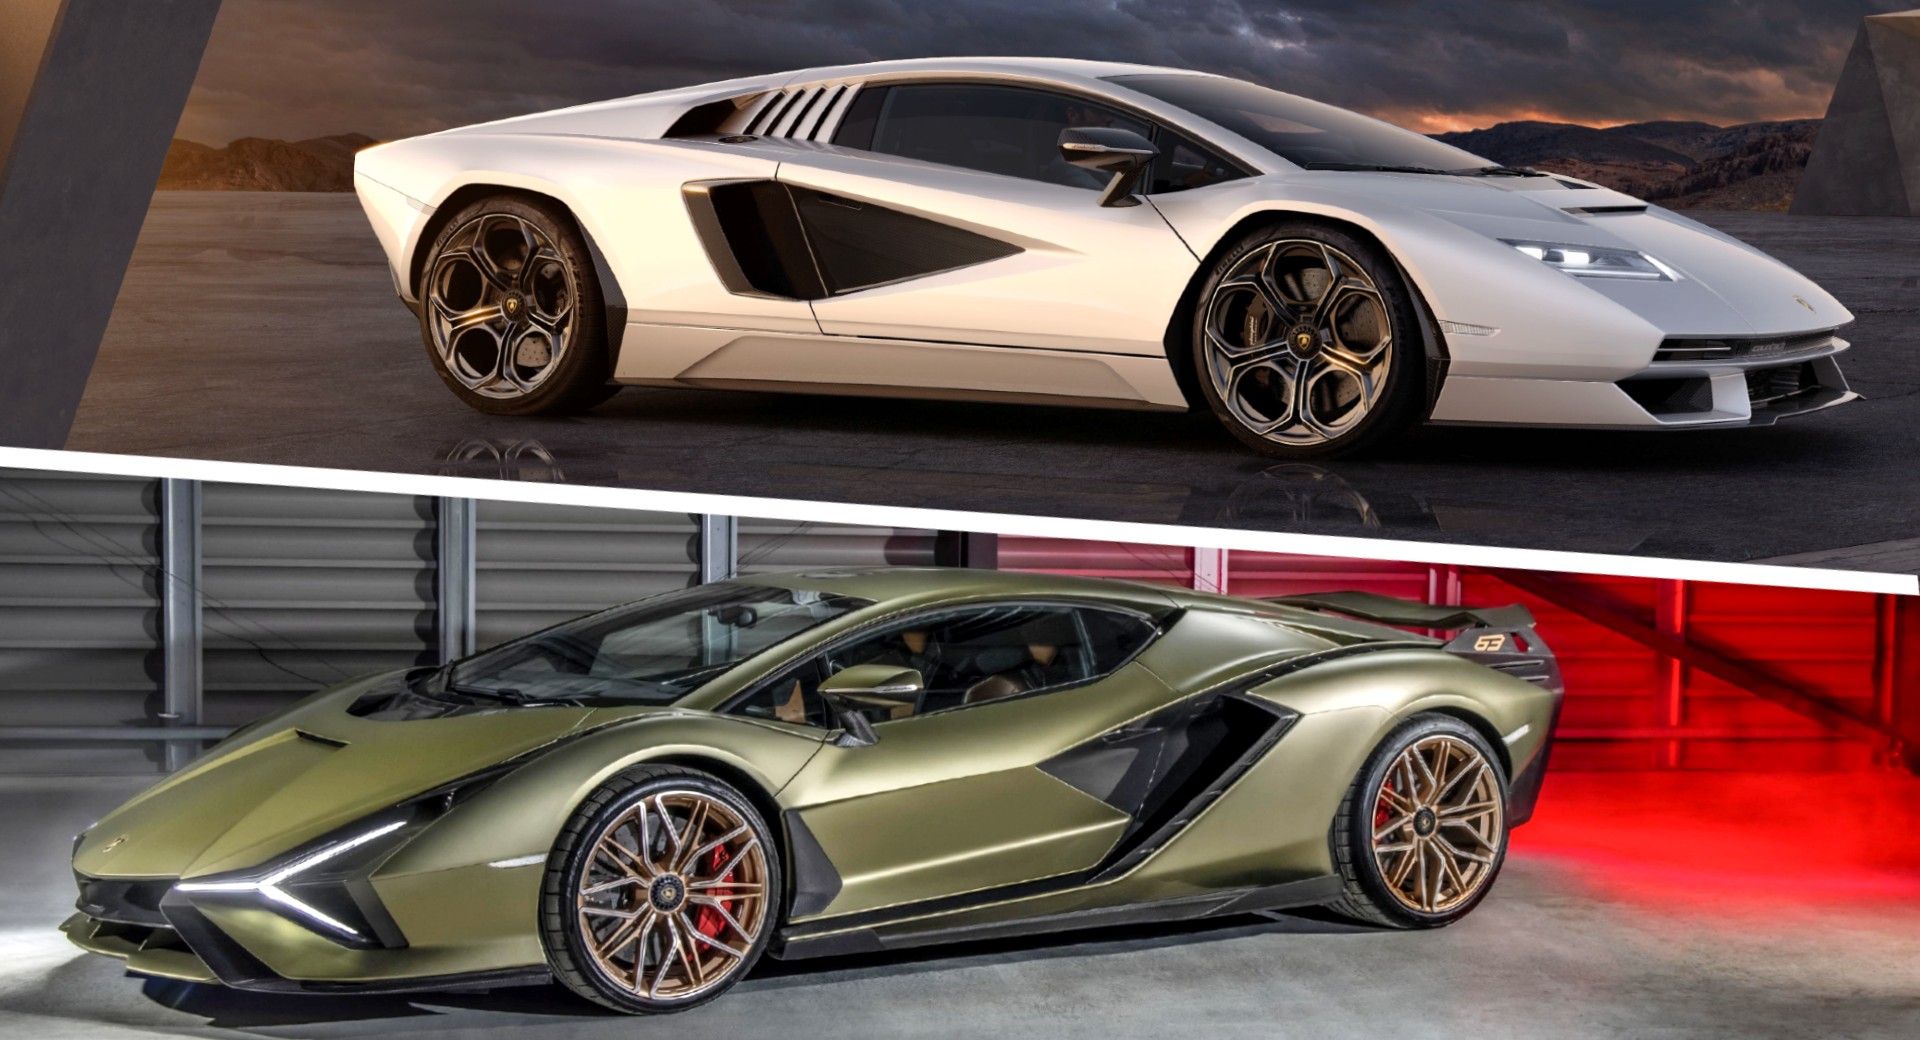 How Does The Lamborghini Countach LPI 800-4 Compare To The Sián FKP 37? |  Carscoops